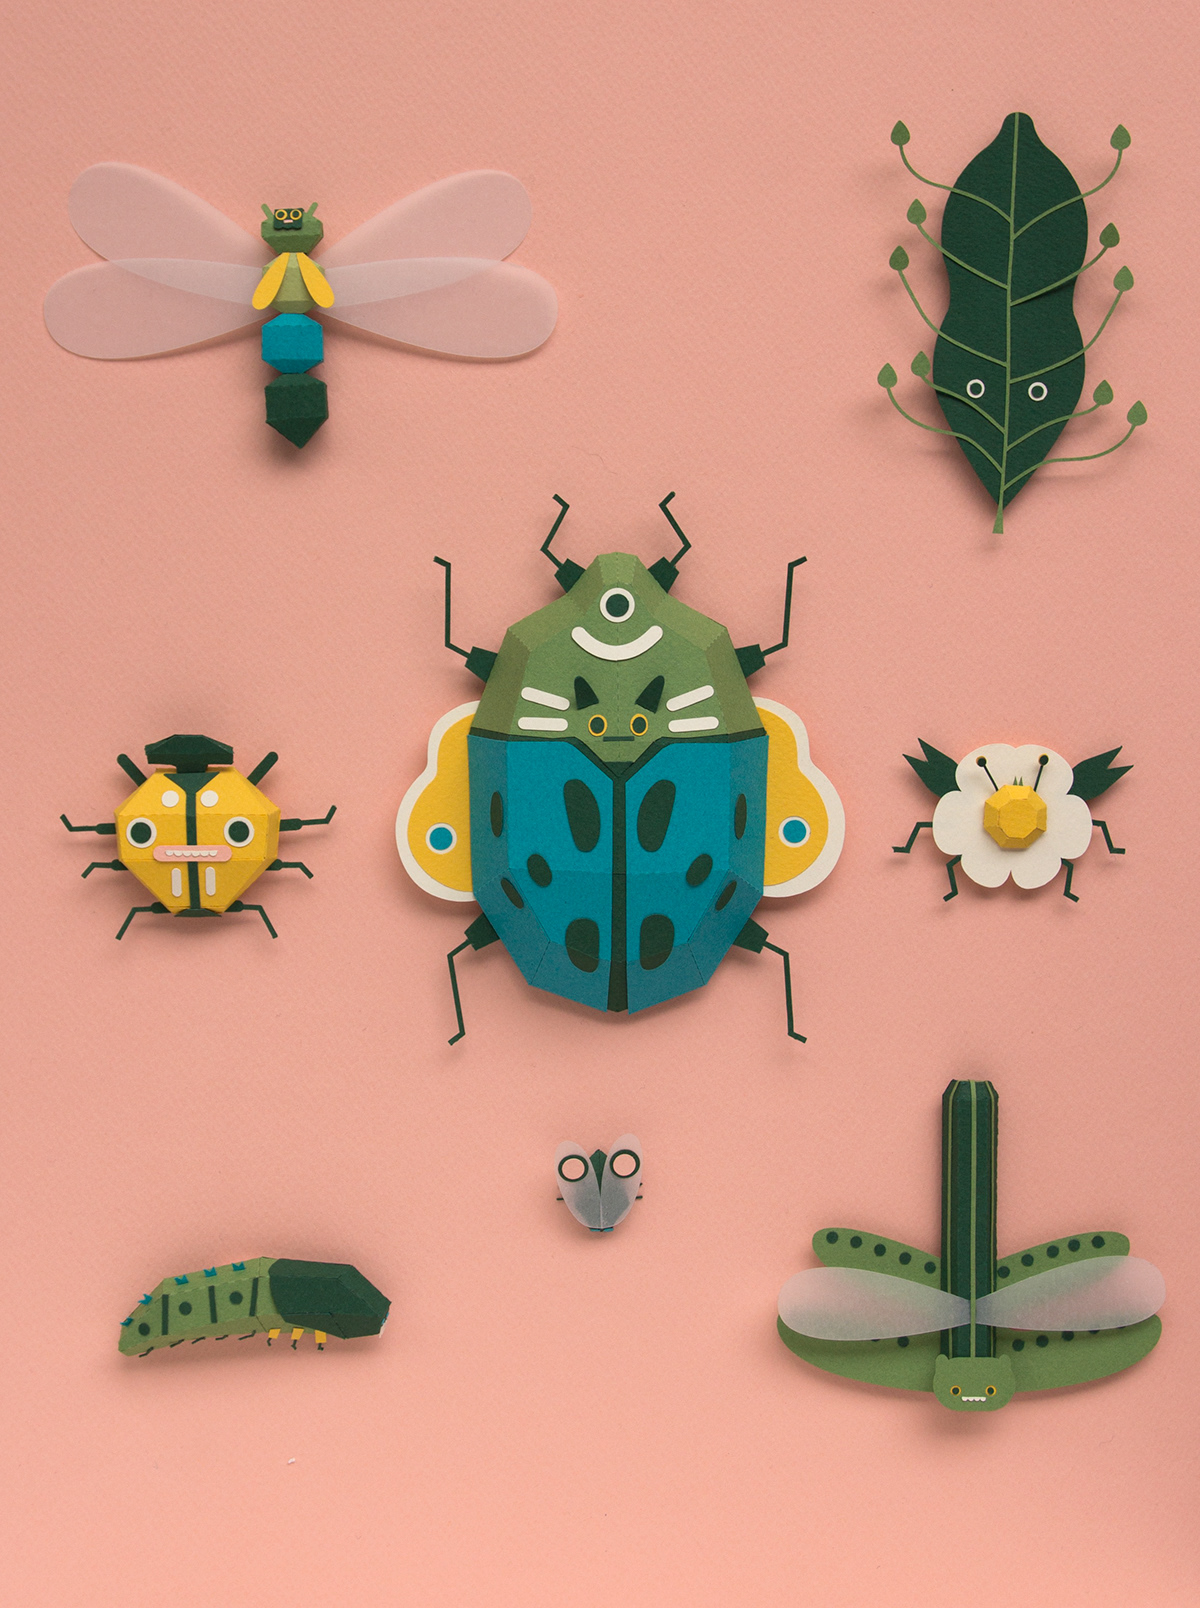 musgor papercraft guardabosques Museo del humor kaiju mutante monster lowpoly paper beetles Exhibition 